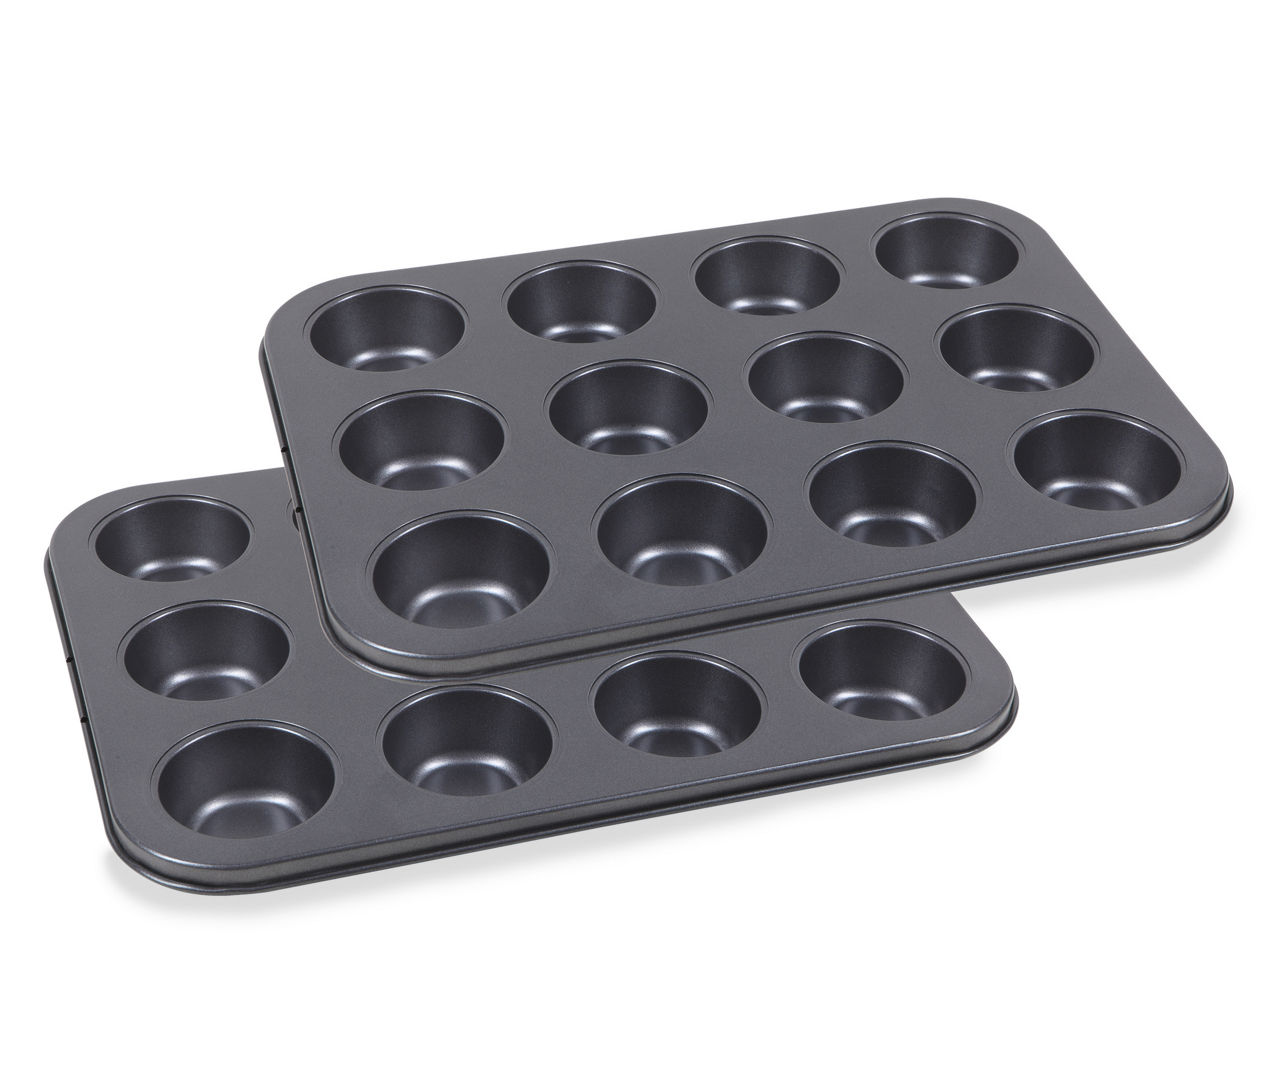 Silicone Mini Muffin and cupcake 2 Pack Mold Baking Pan 12/24 cup